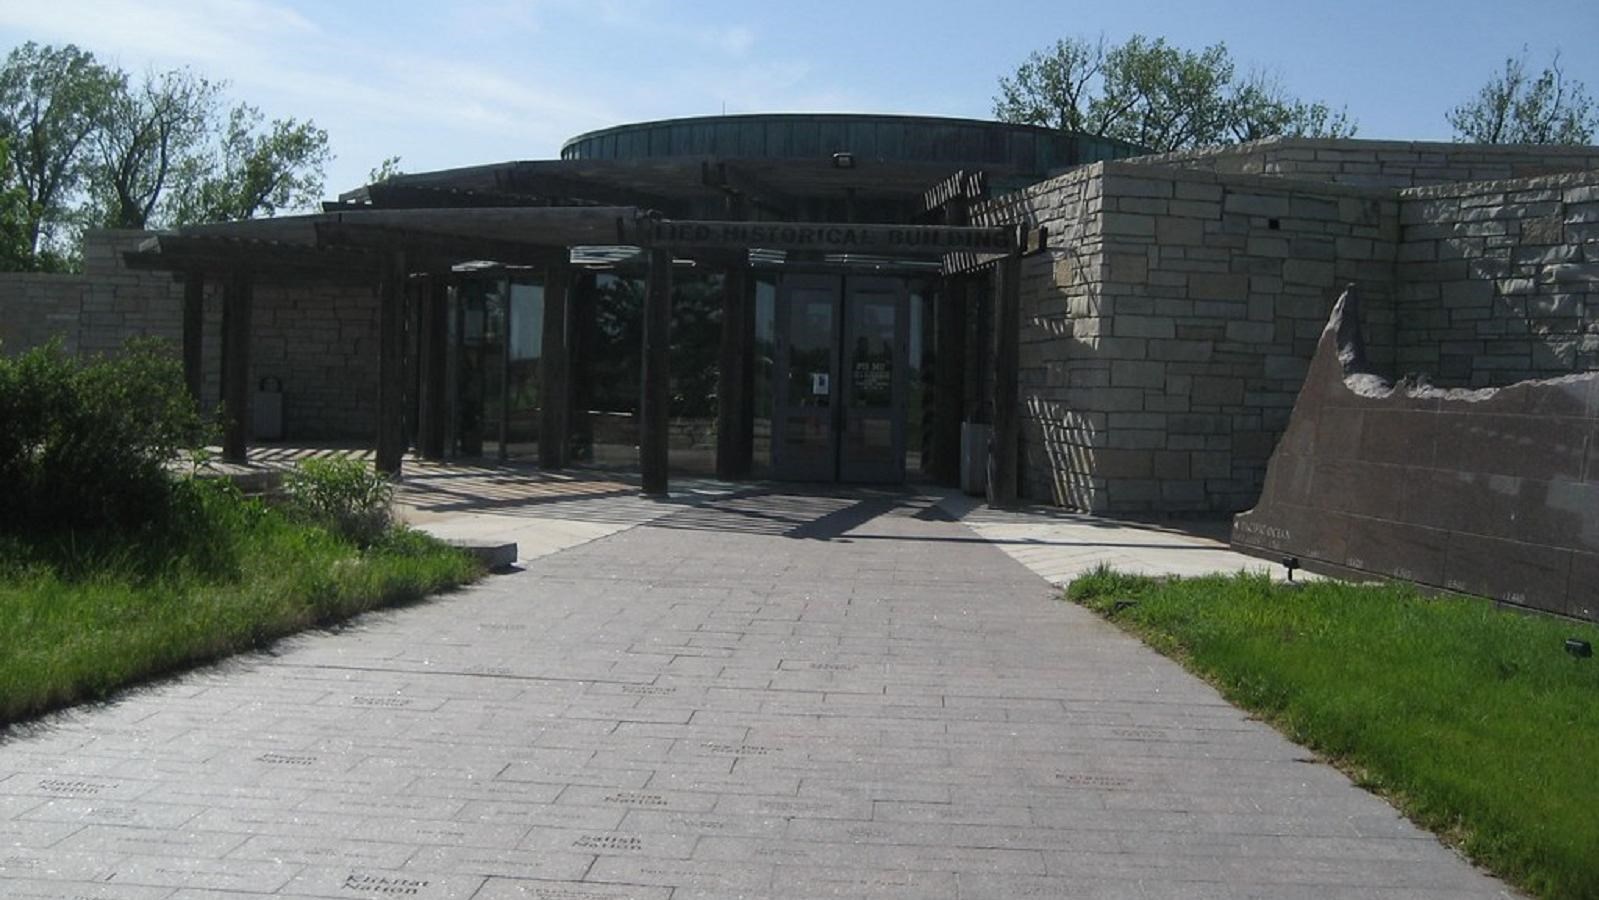 A low-lying building of gray stone with glass doors flanked by trees sits on a green lawn.